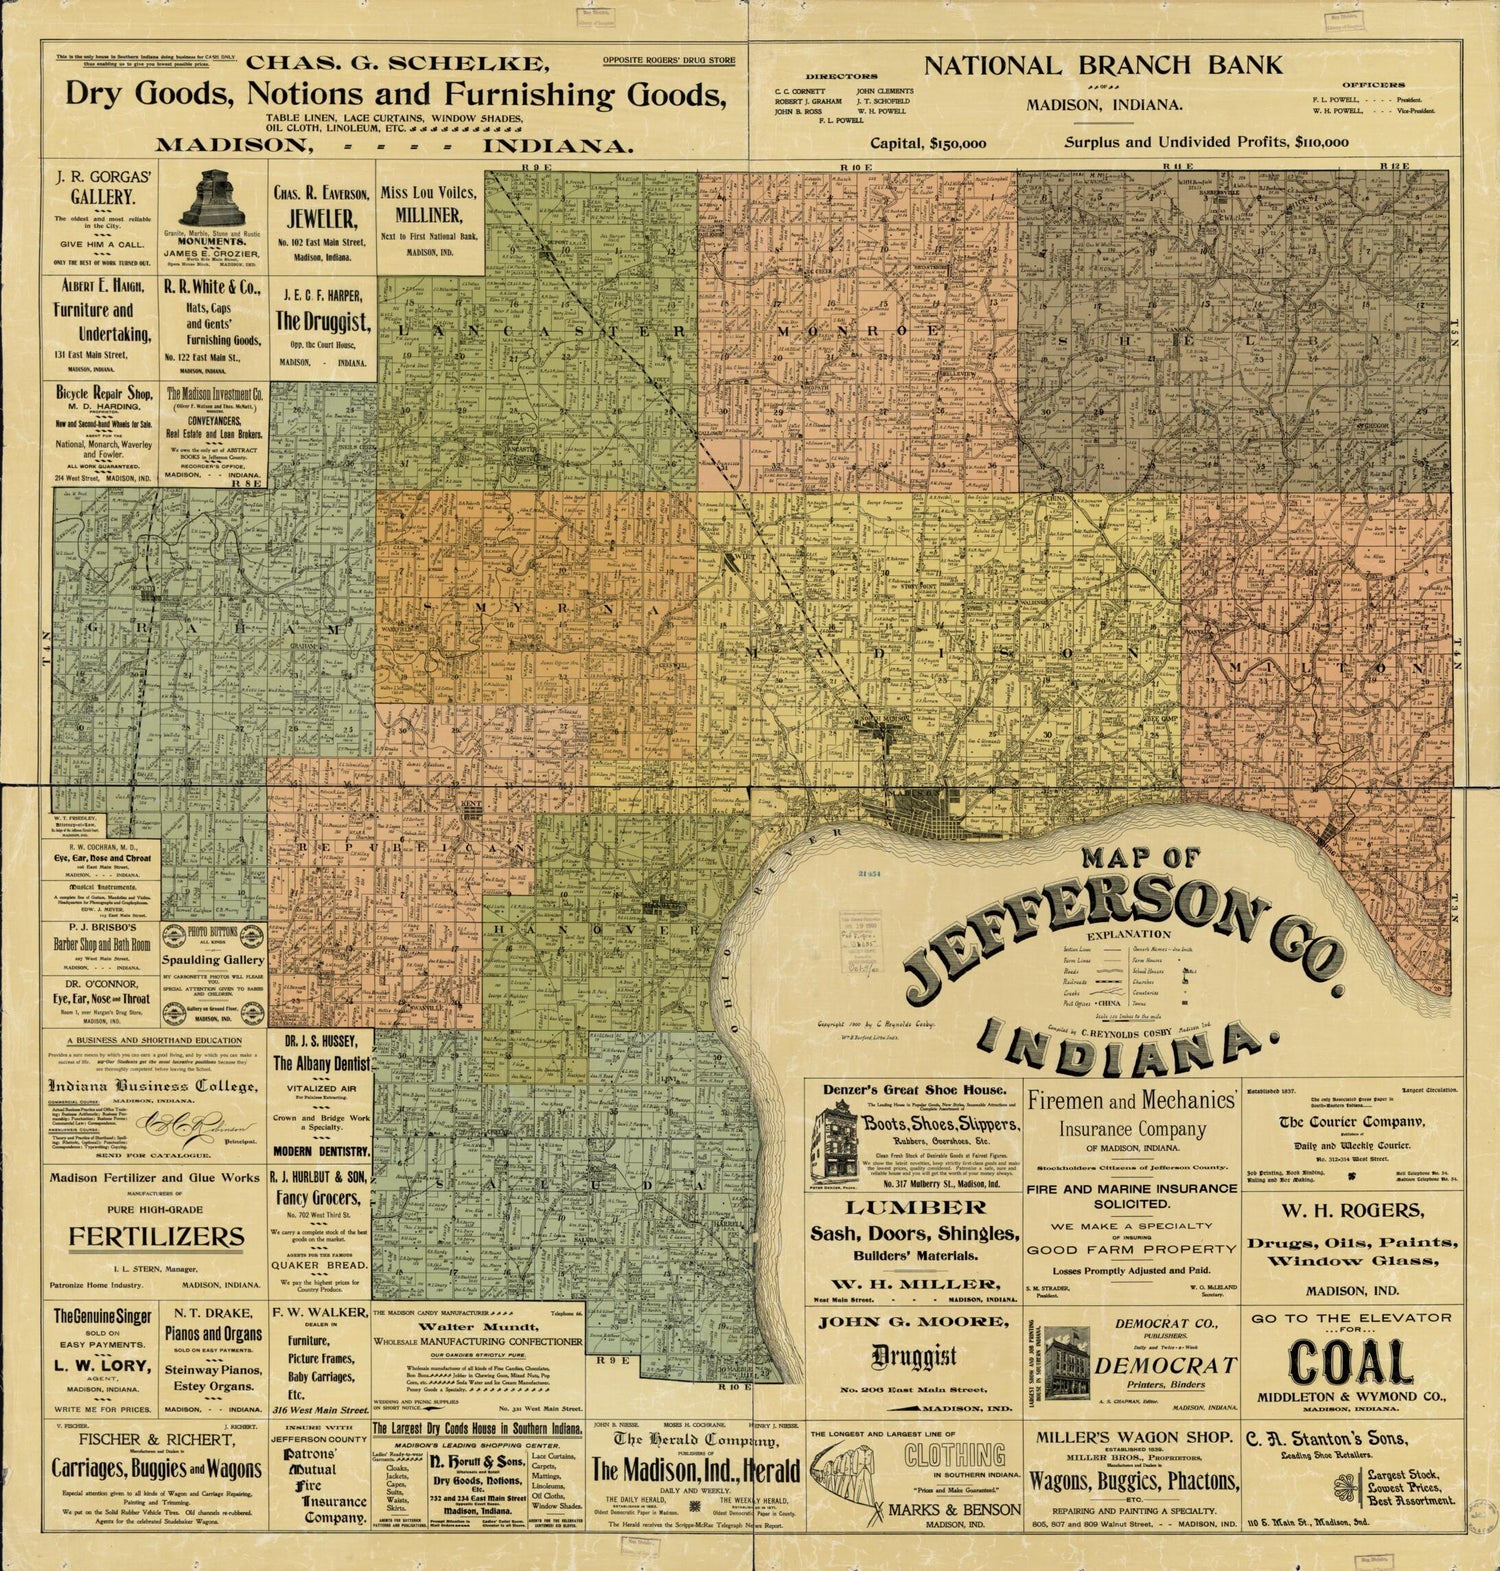 This old map of Map of Jefferson Co., Indiana from 1900 was created by C. Reynolds Cosby in 1900